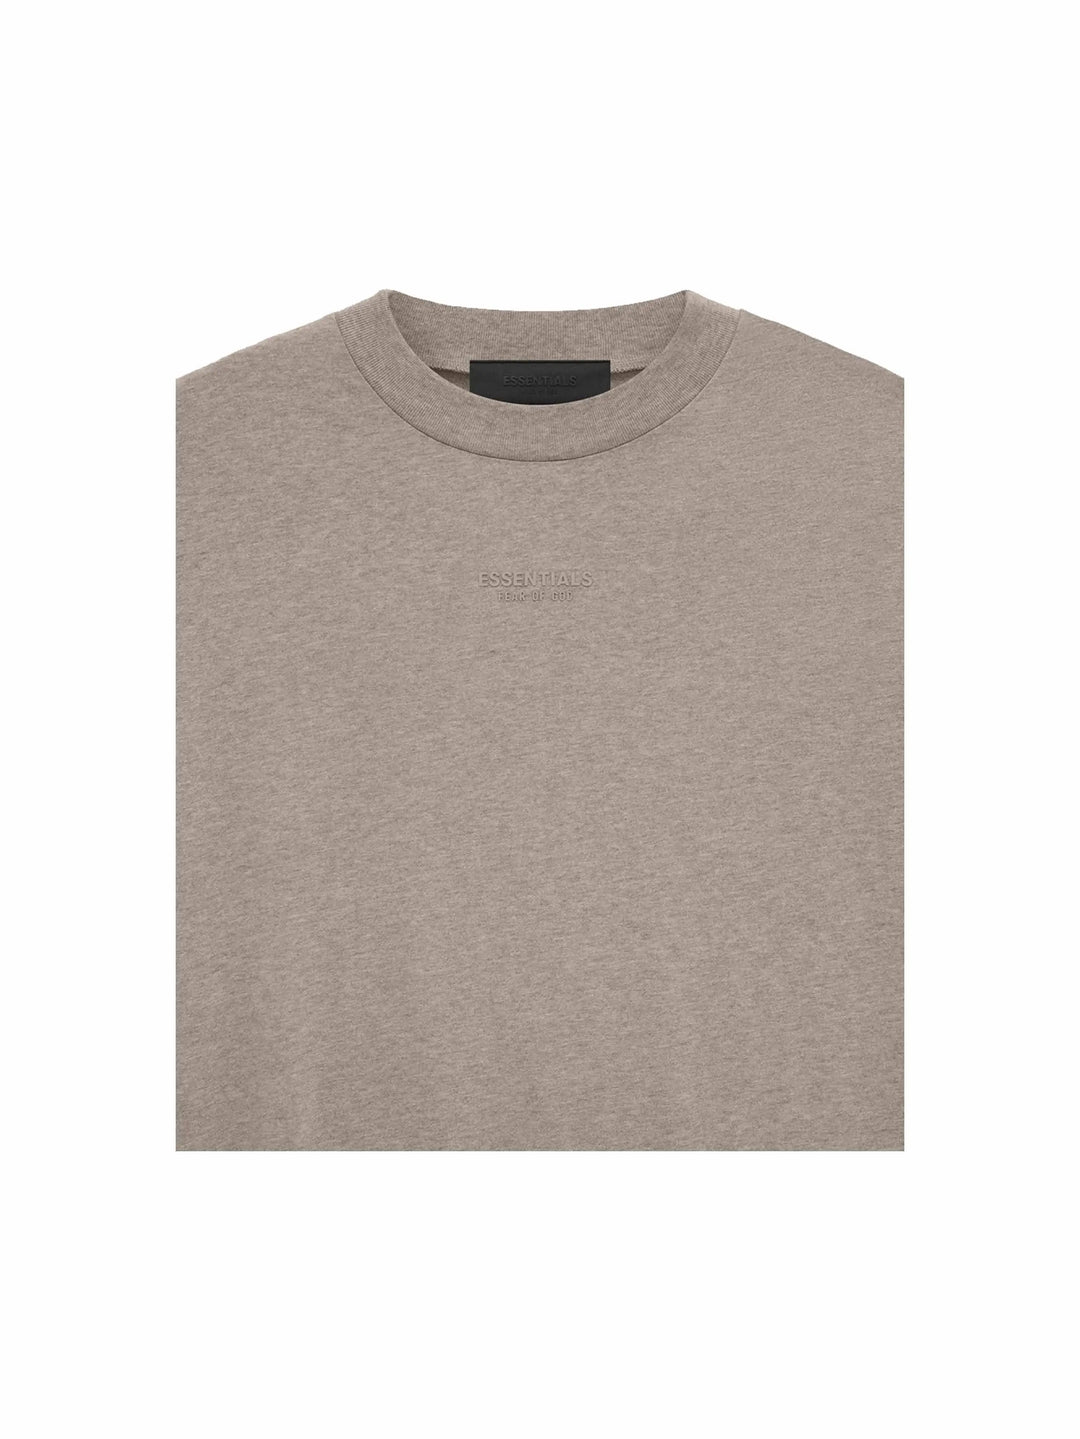 Fear of God Essentials Tee Core Heather - Prior